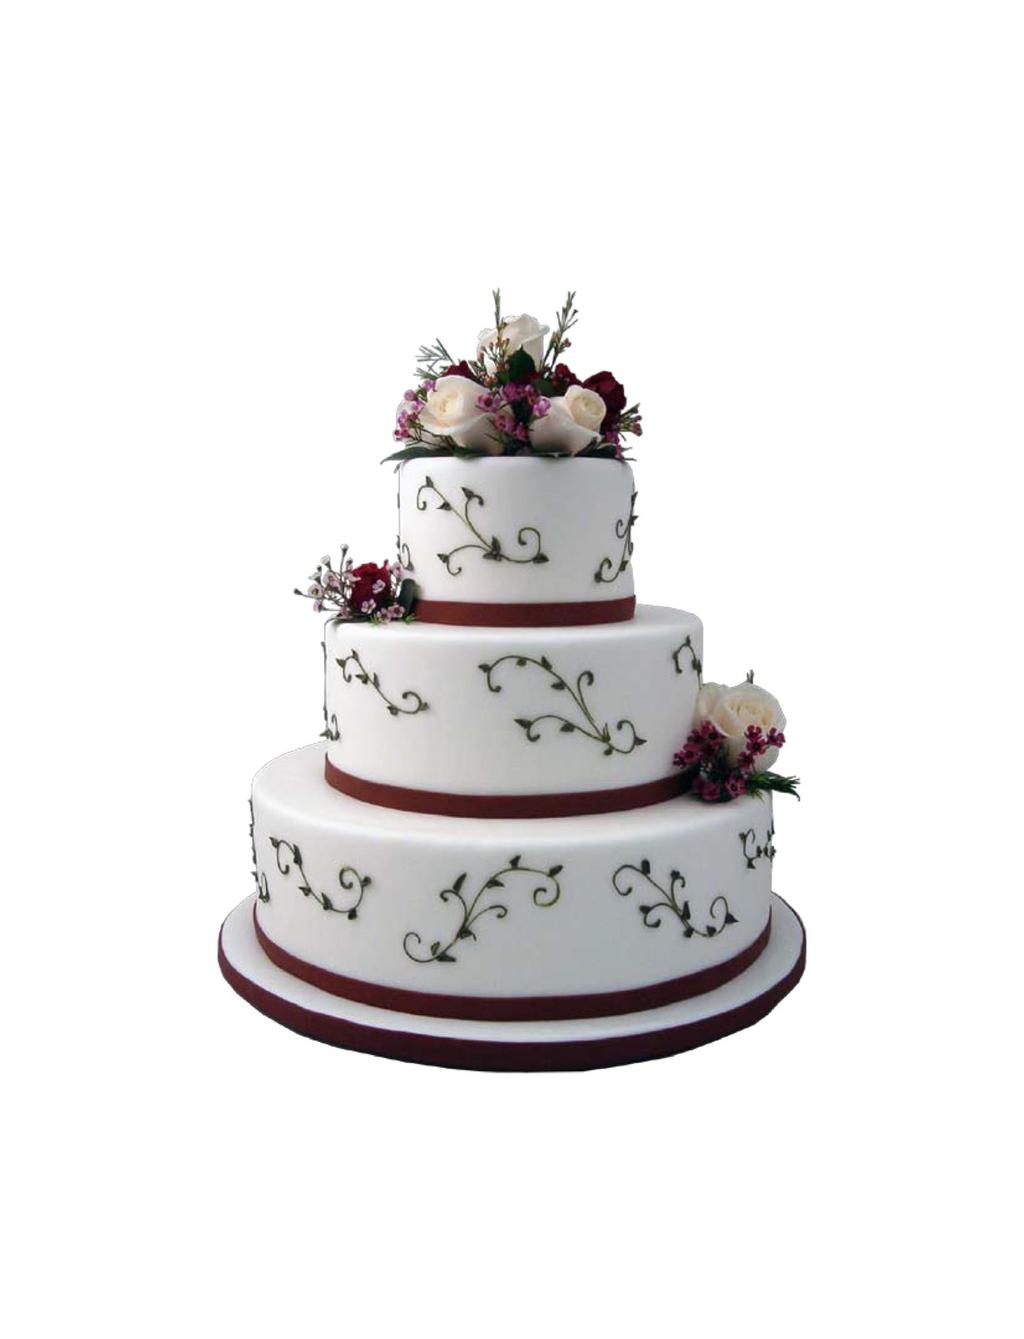 This is due to the weight of the cake, and will allow you to have the wedding cake appearance while making it easy and quick for the servers to cut and serve the cake to your guests.